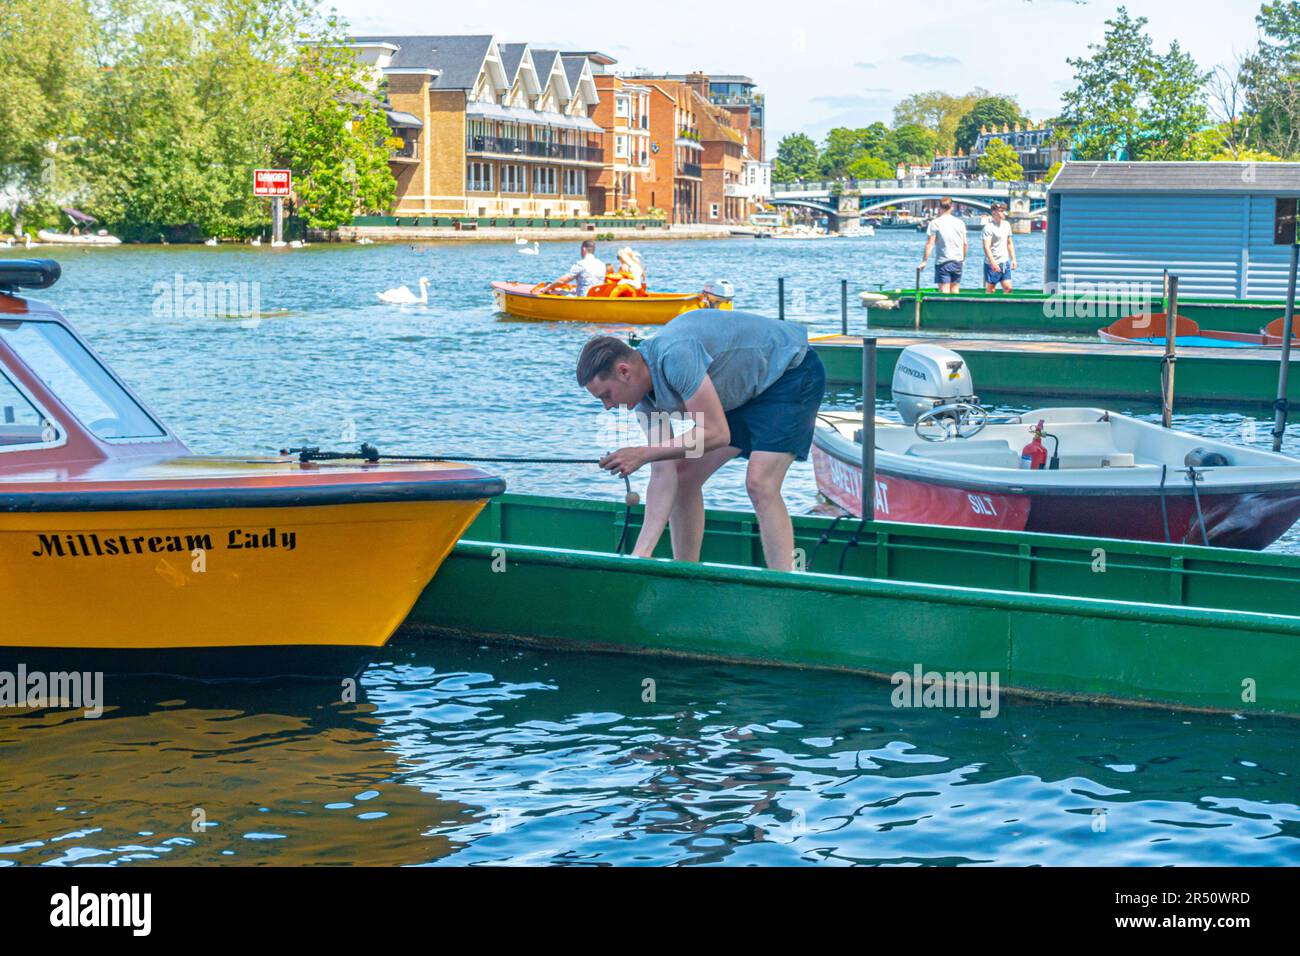 A man ties up a hire boat in The River Thames at Windsor in Berkshire, UK Stock Photo